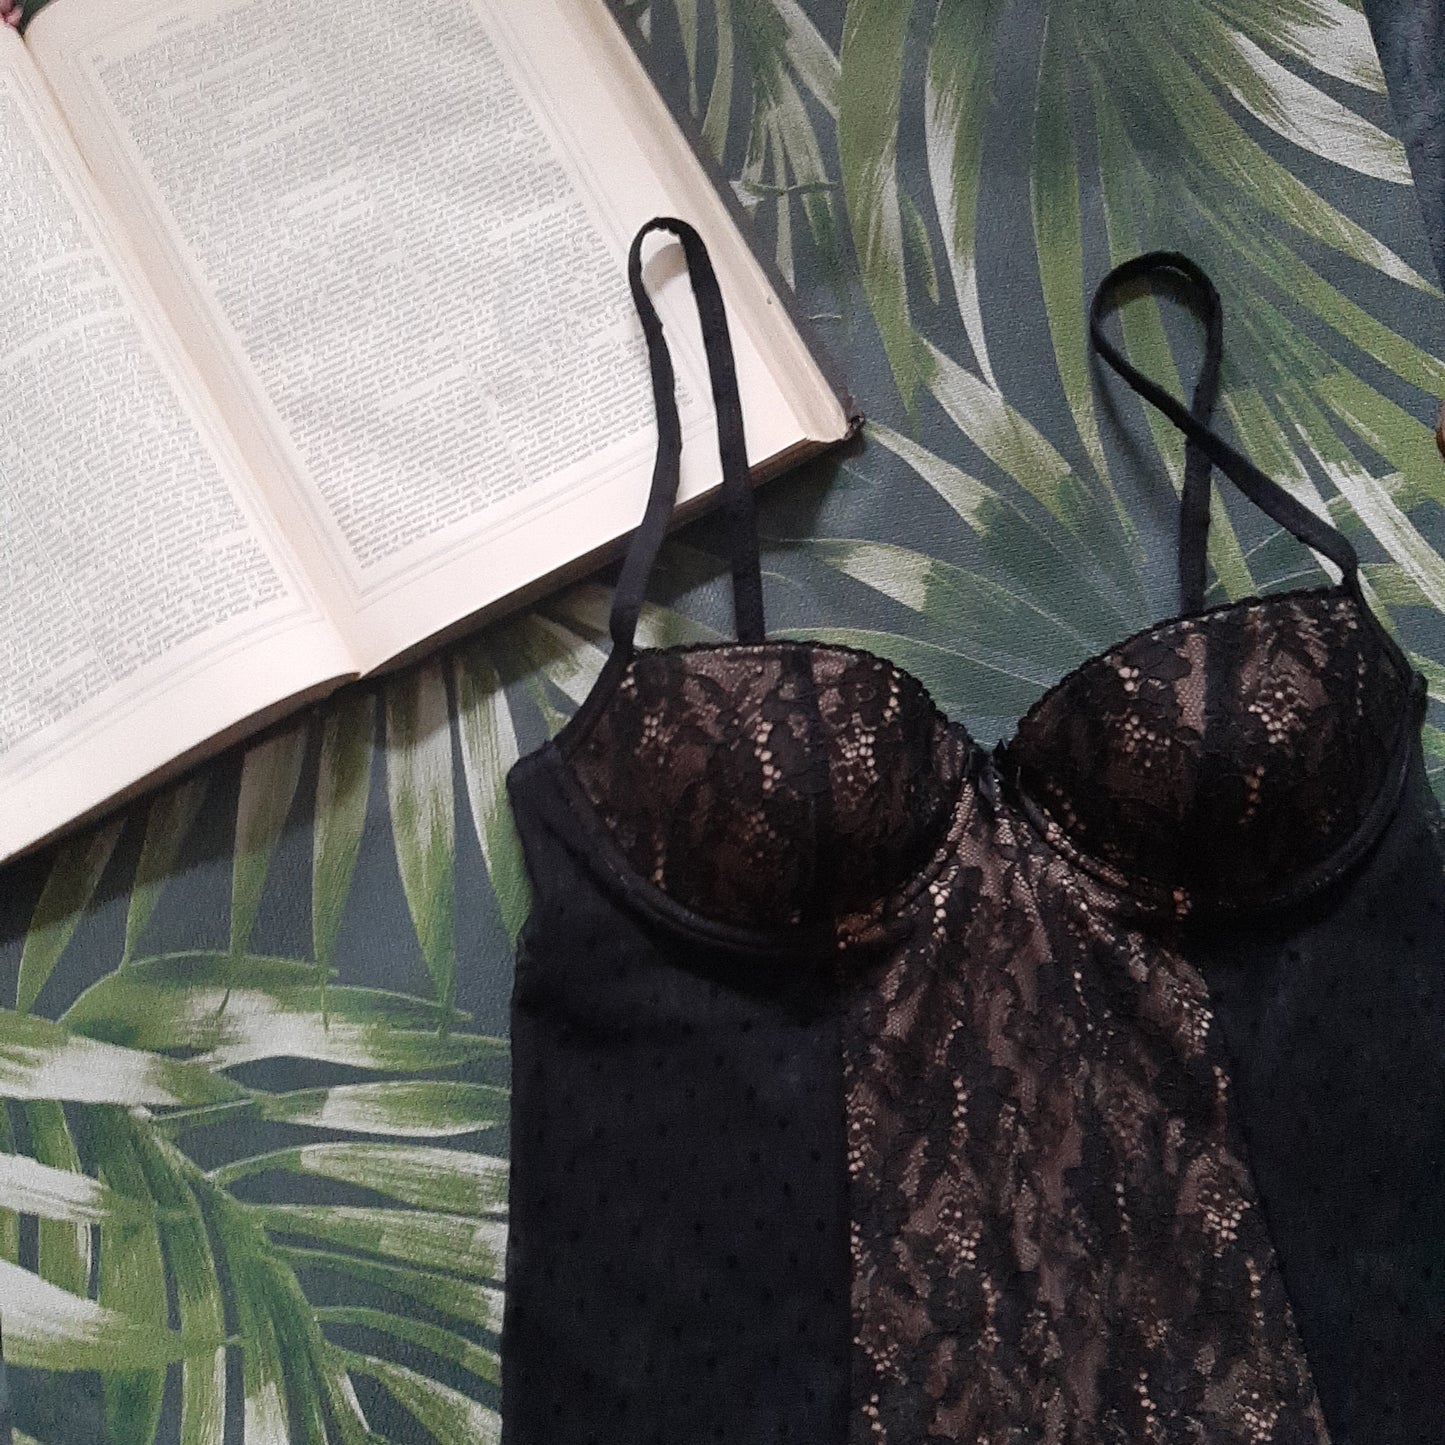 Black and caramel lace negligee